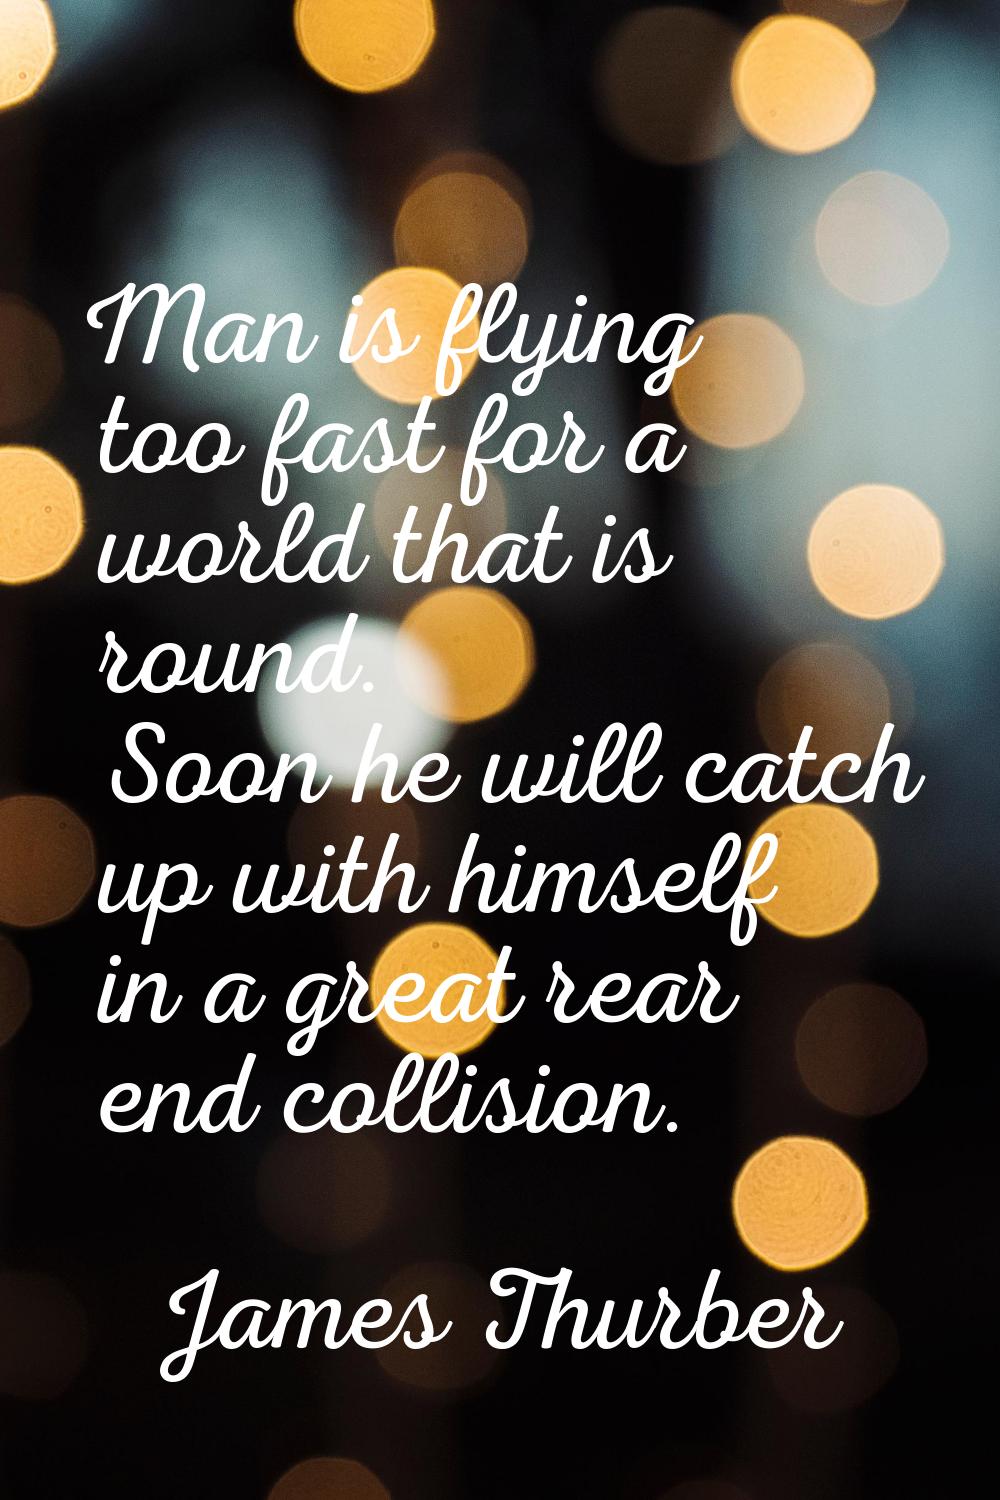 Man is flying too fast for a world that is round. Soon he will catch up with himself in a great rea